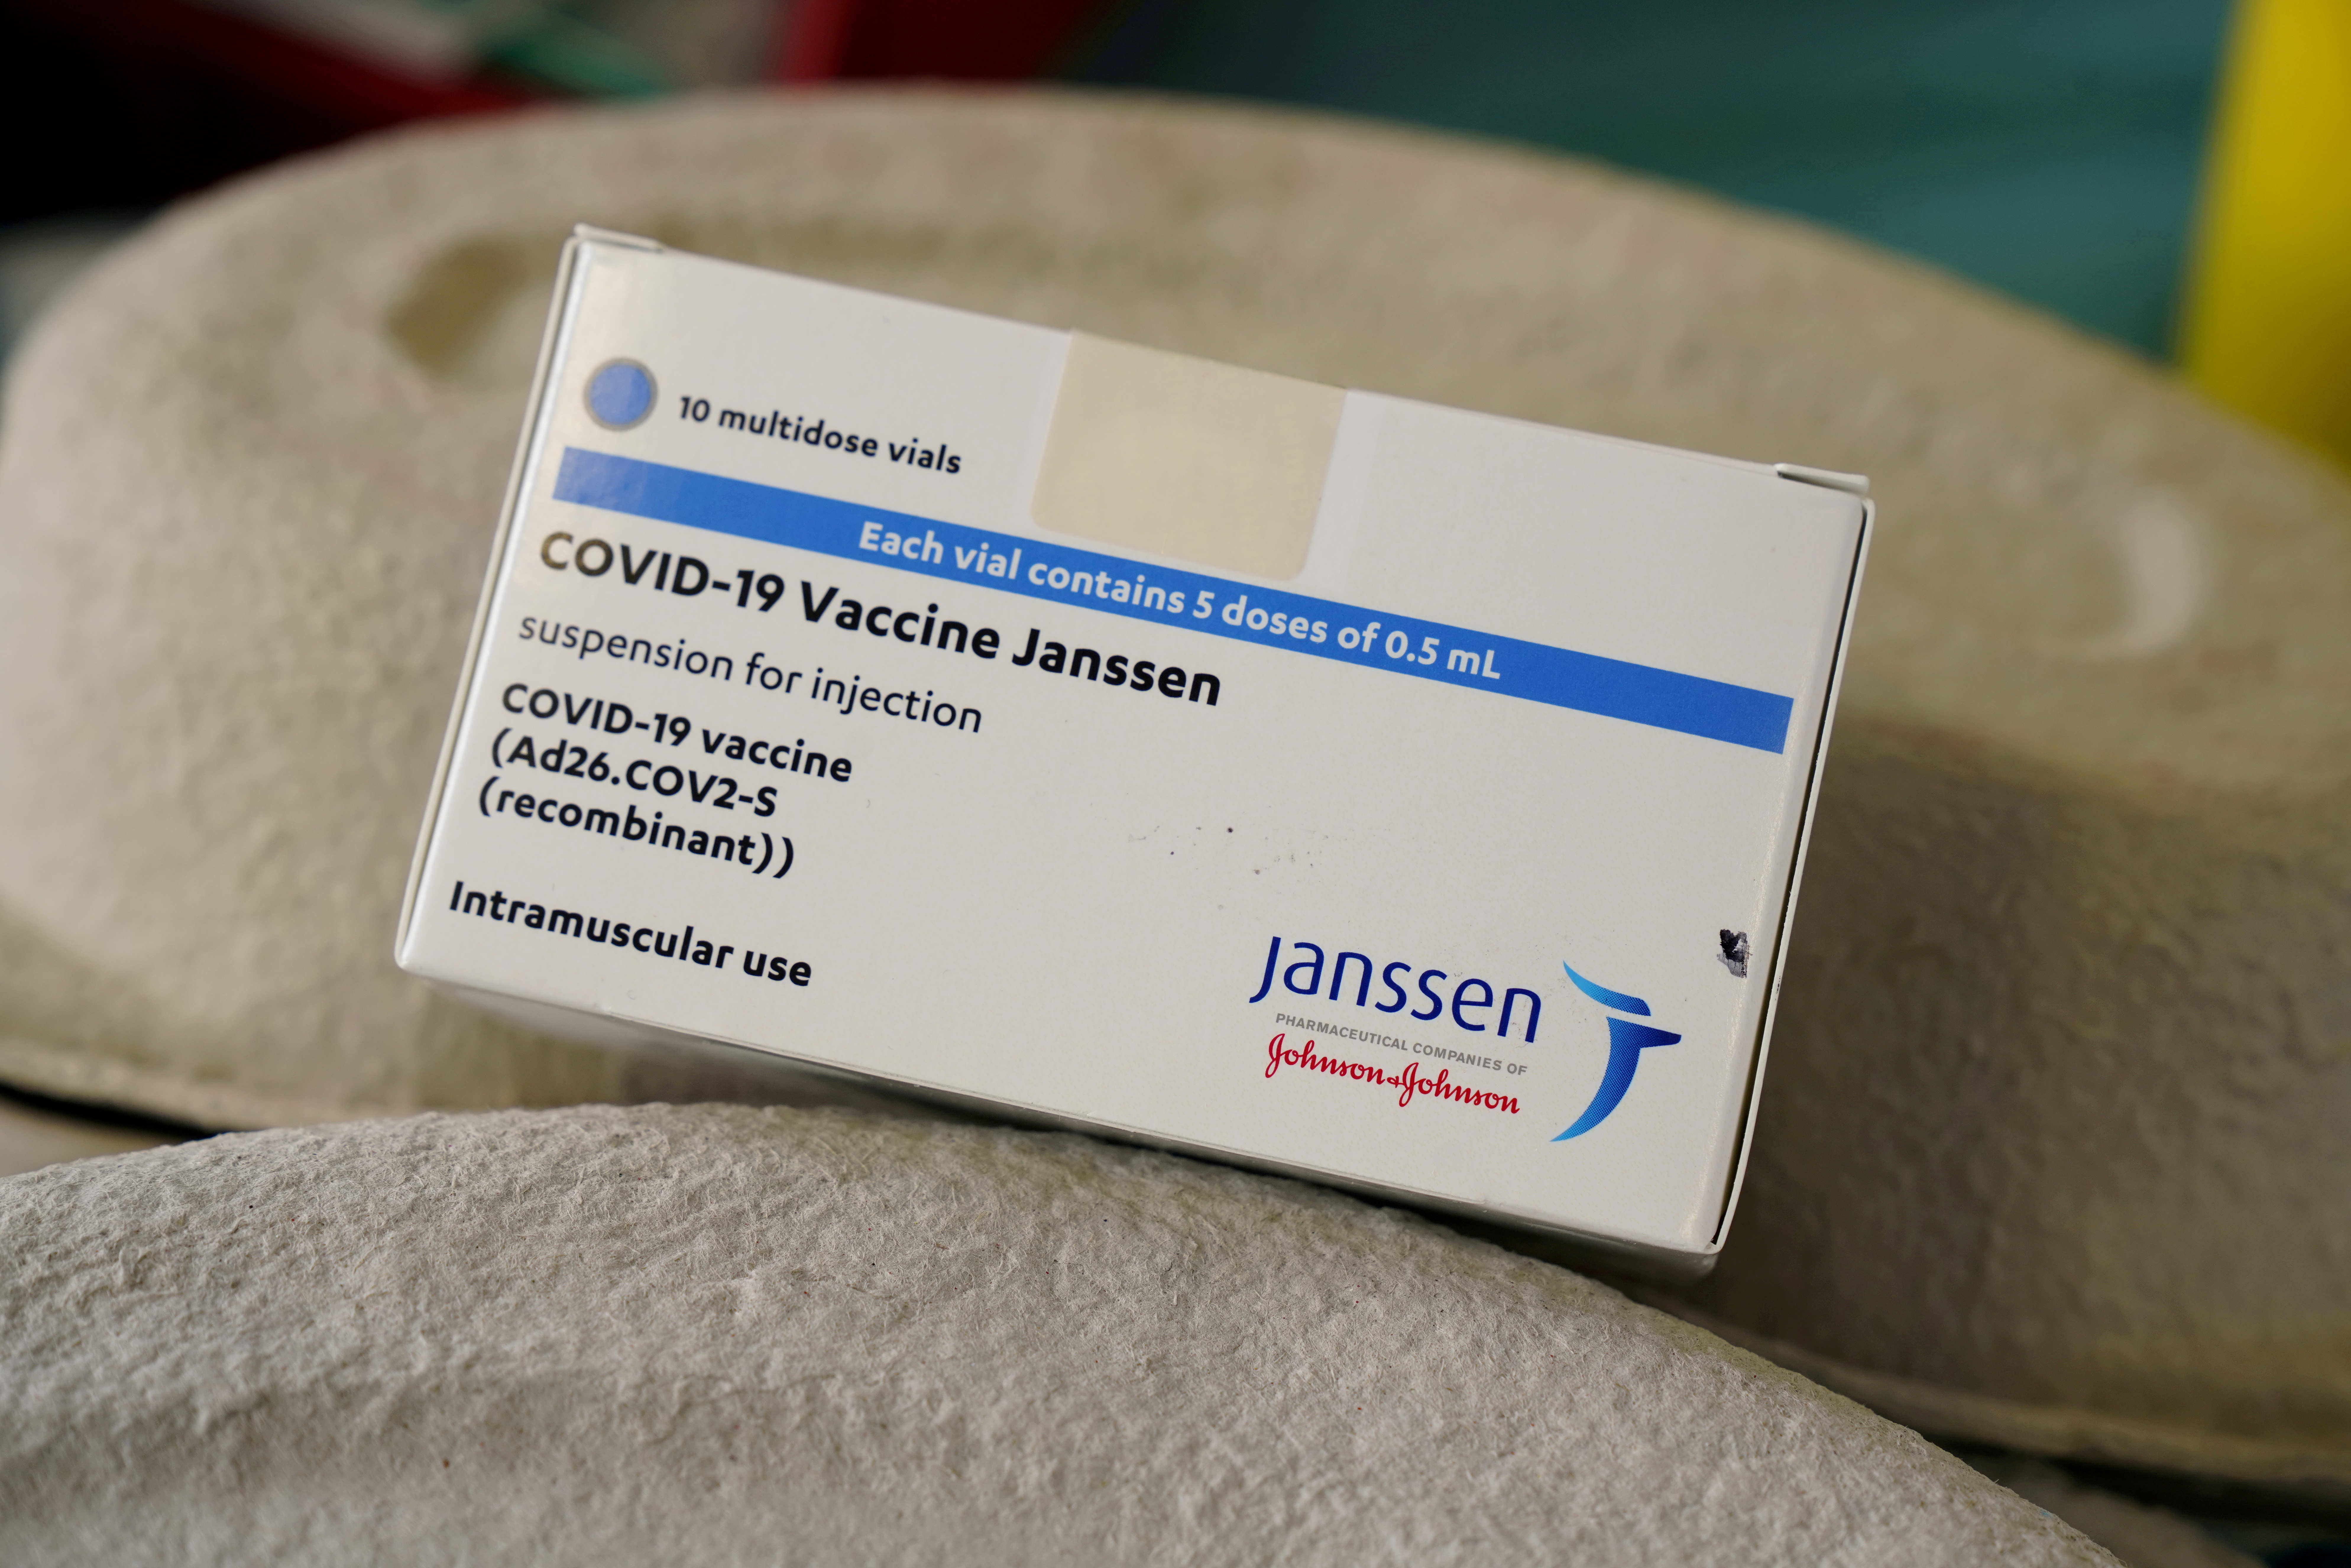 A box of Johnson & Johnson's COVID-19 vaccines is seen at the Forem vaccination centre in Pamplona